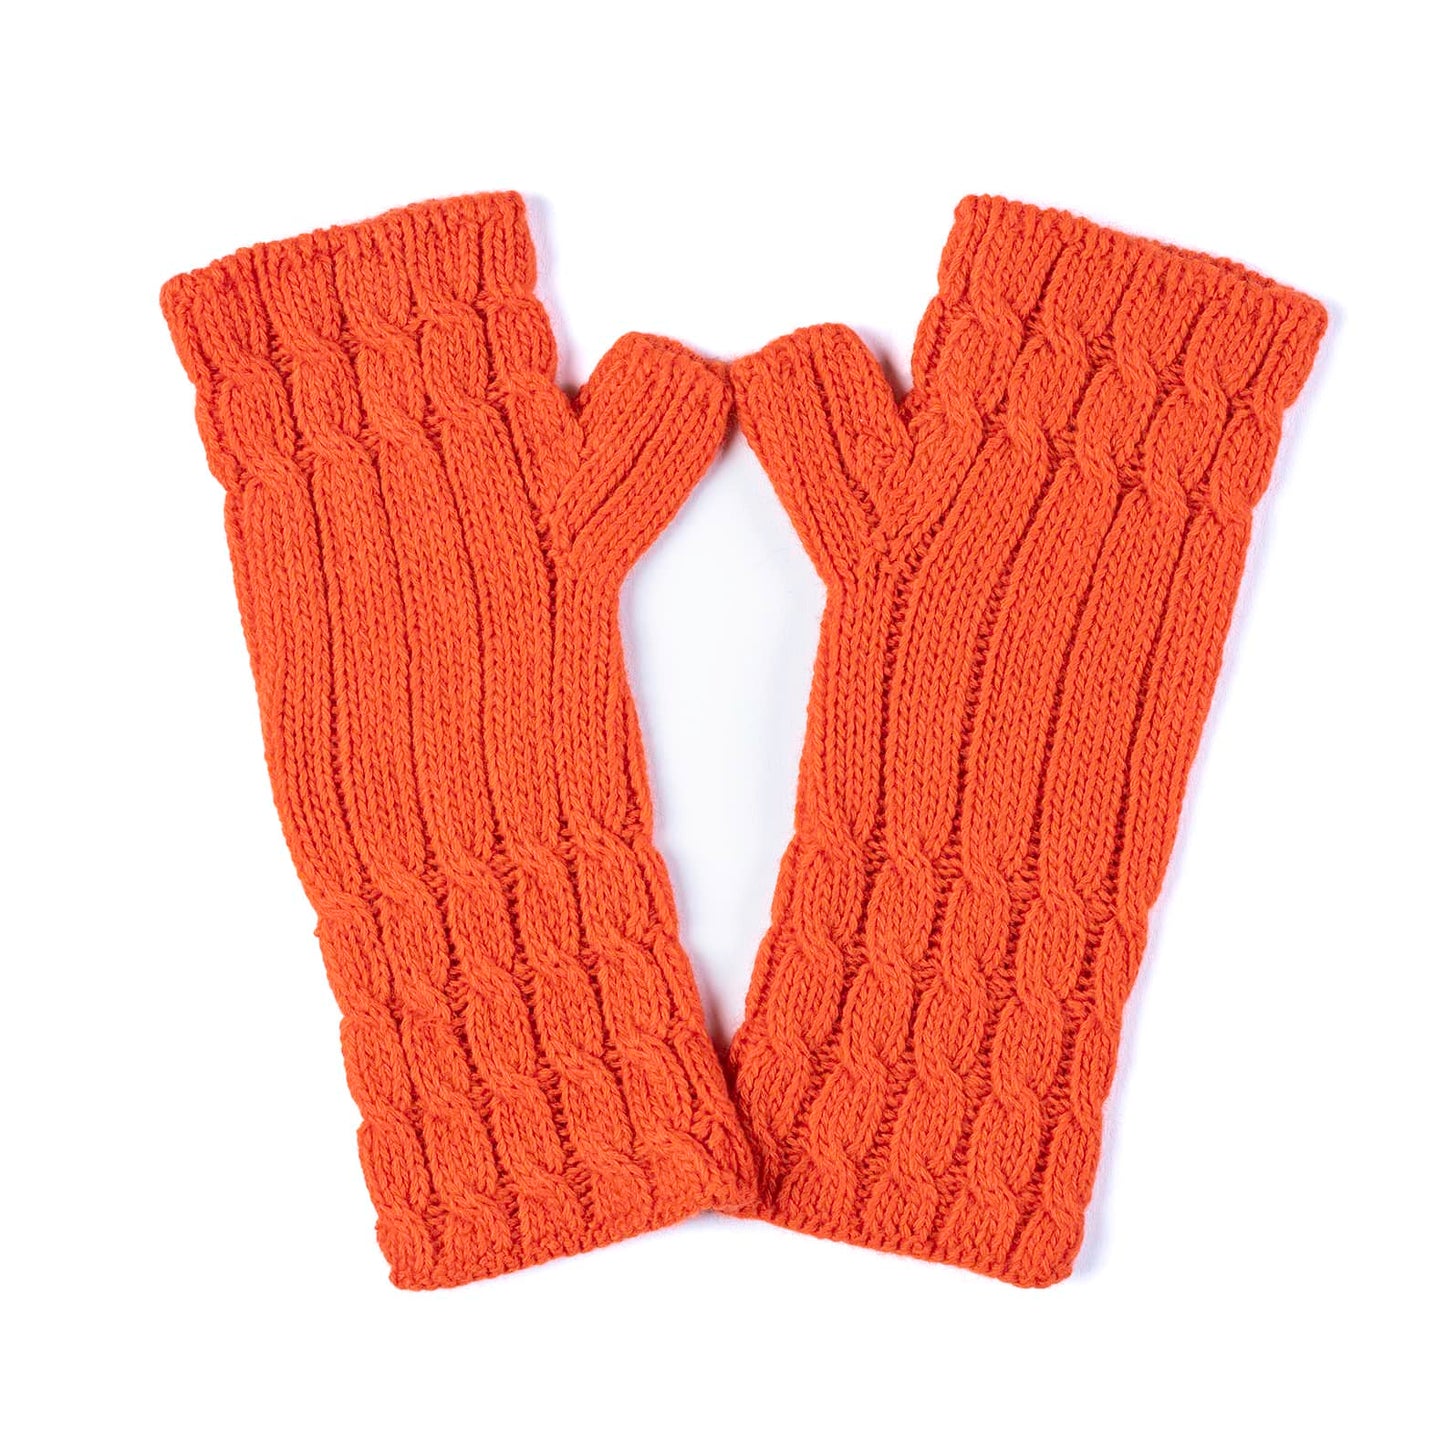 The Cabled Hand Warmers